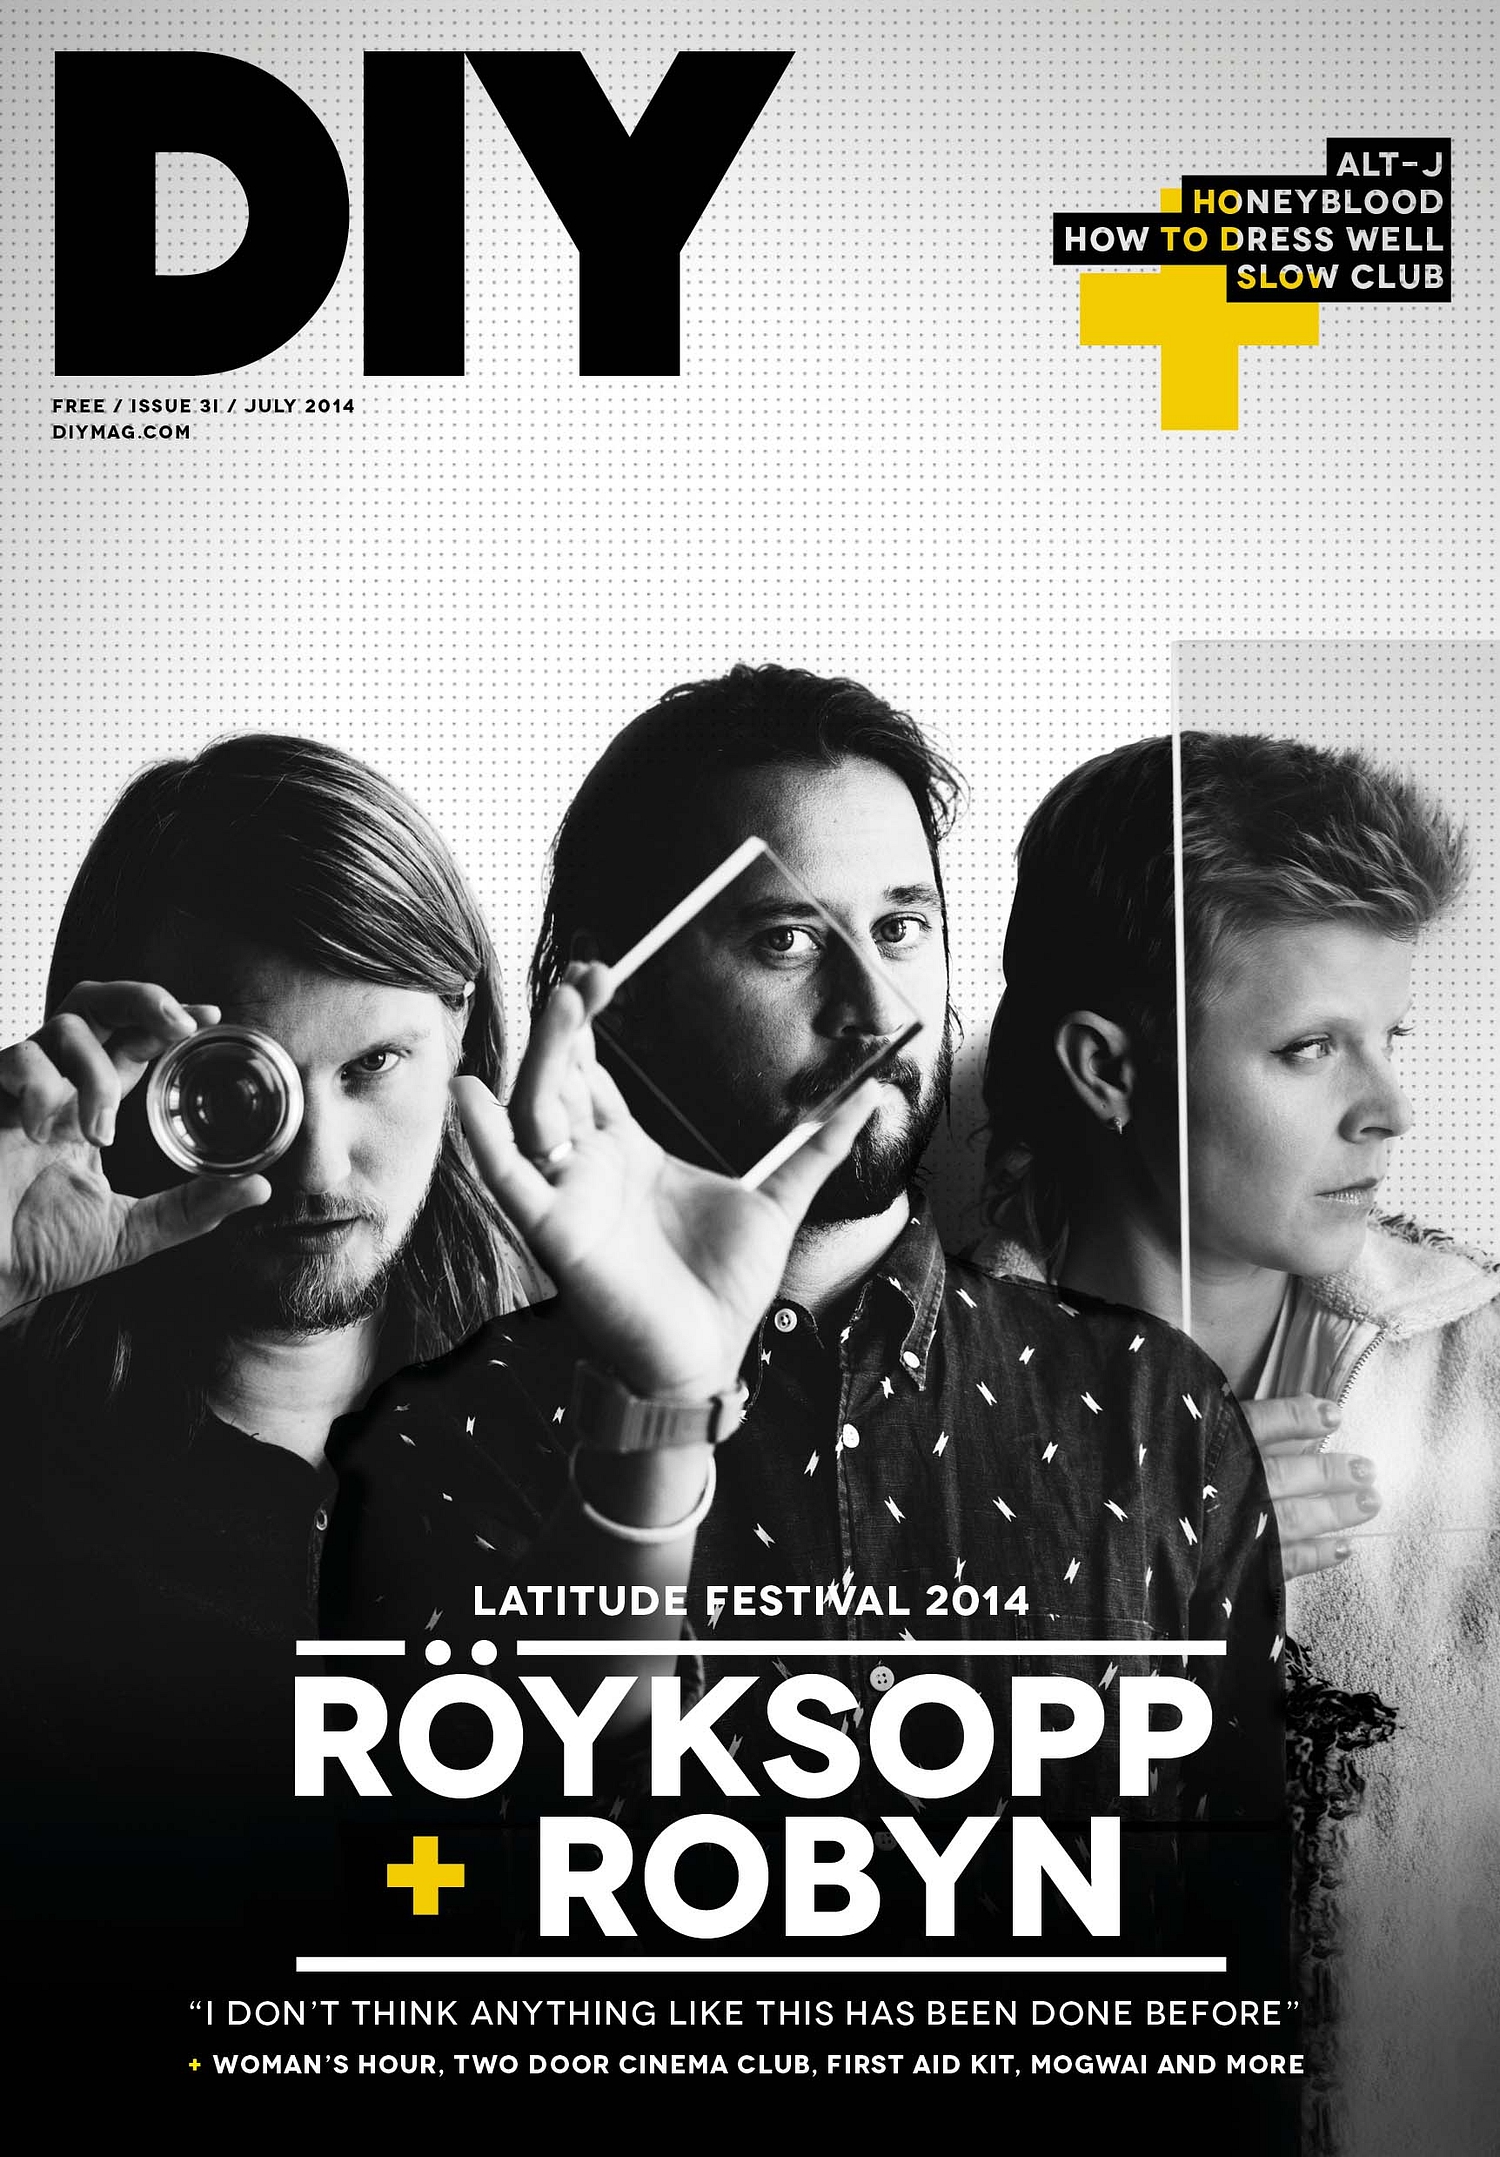 Röyksopp and Robyn: DIY's July 2014 cover stars revealed!